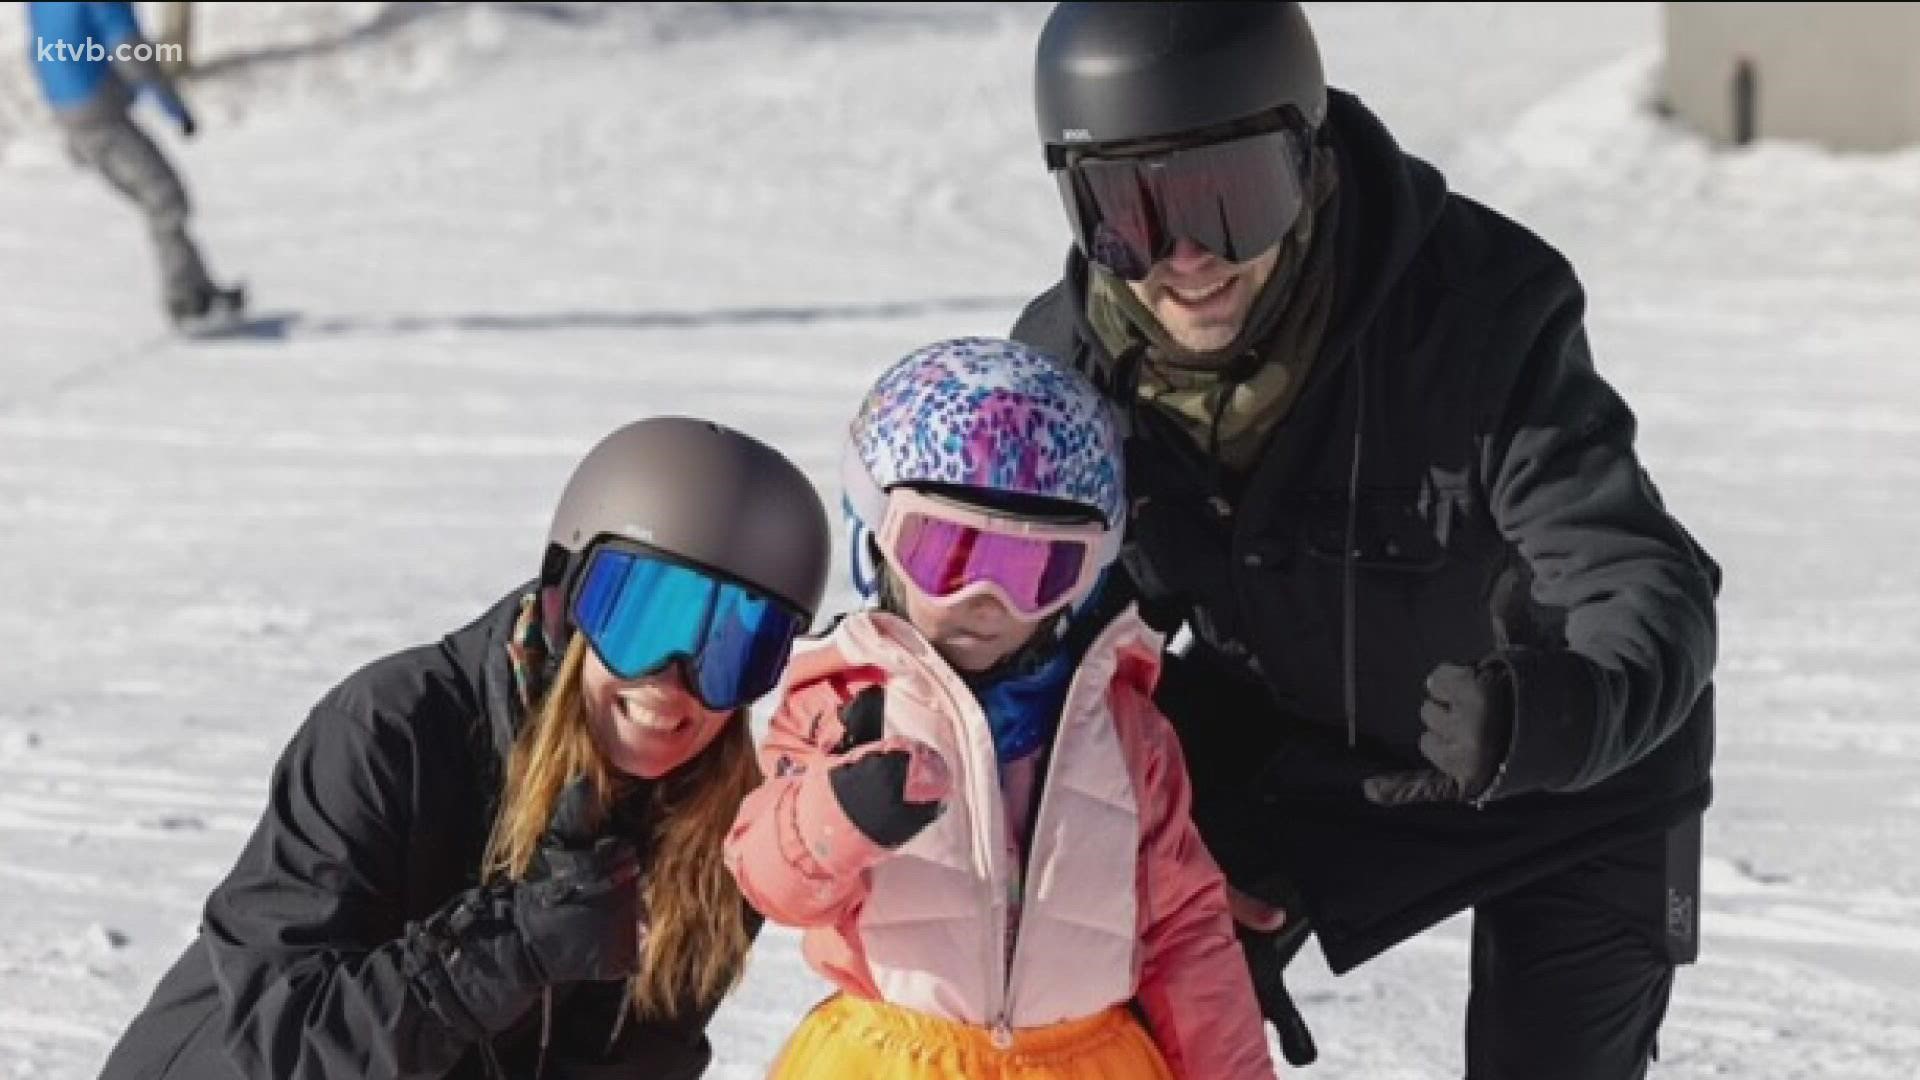 Earlier this month, a TikTok video of Cash Rowley snowboarding received more than two million likes. It is not the Boise girl's first time going viral on the slopes.